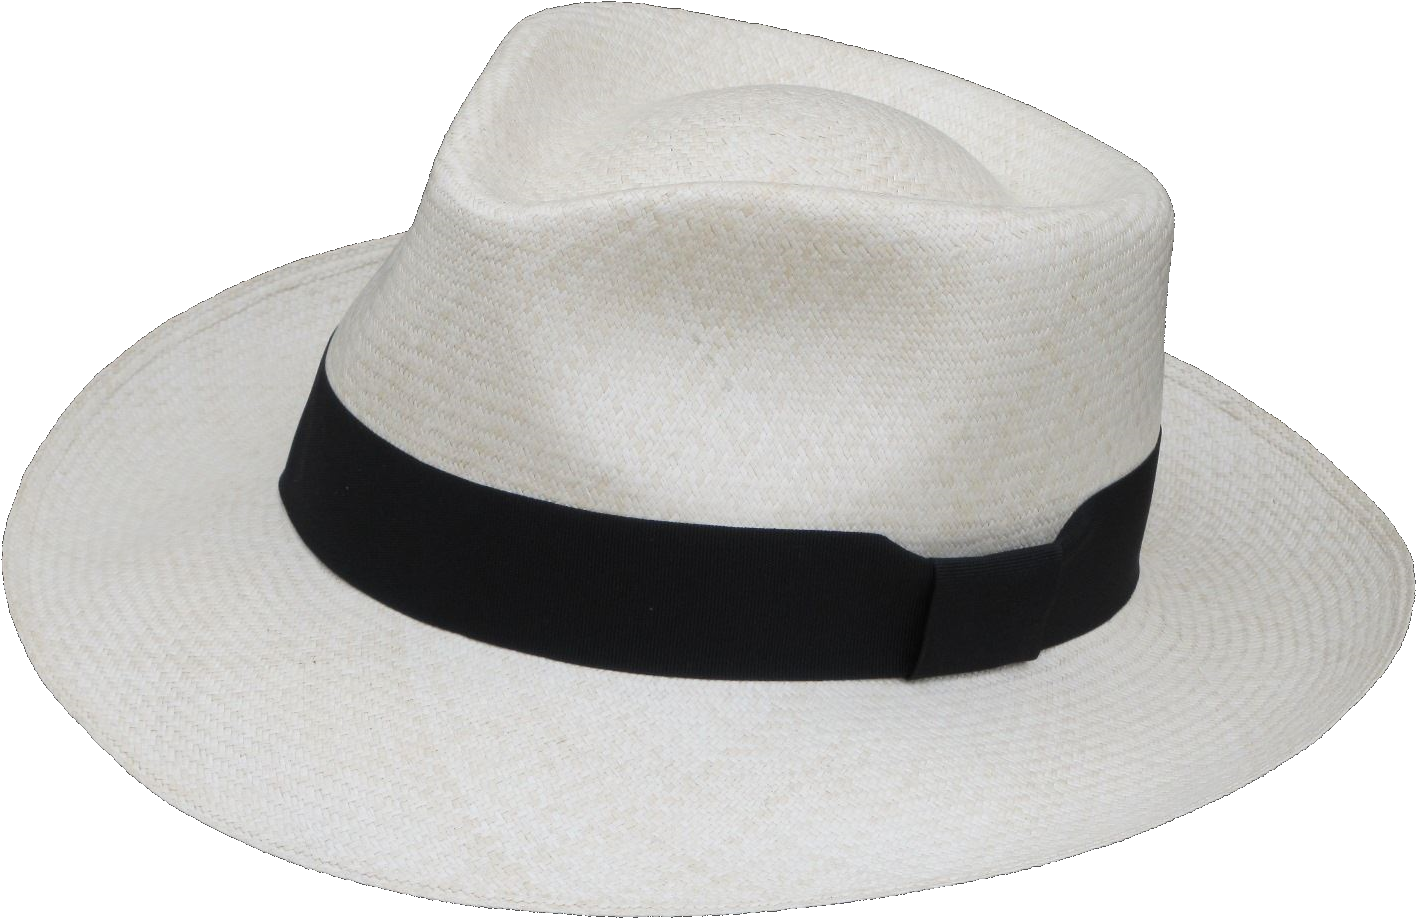 A White Hat With A Black Band